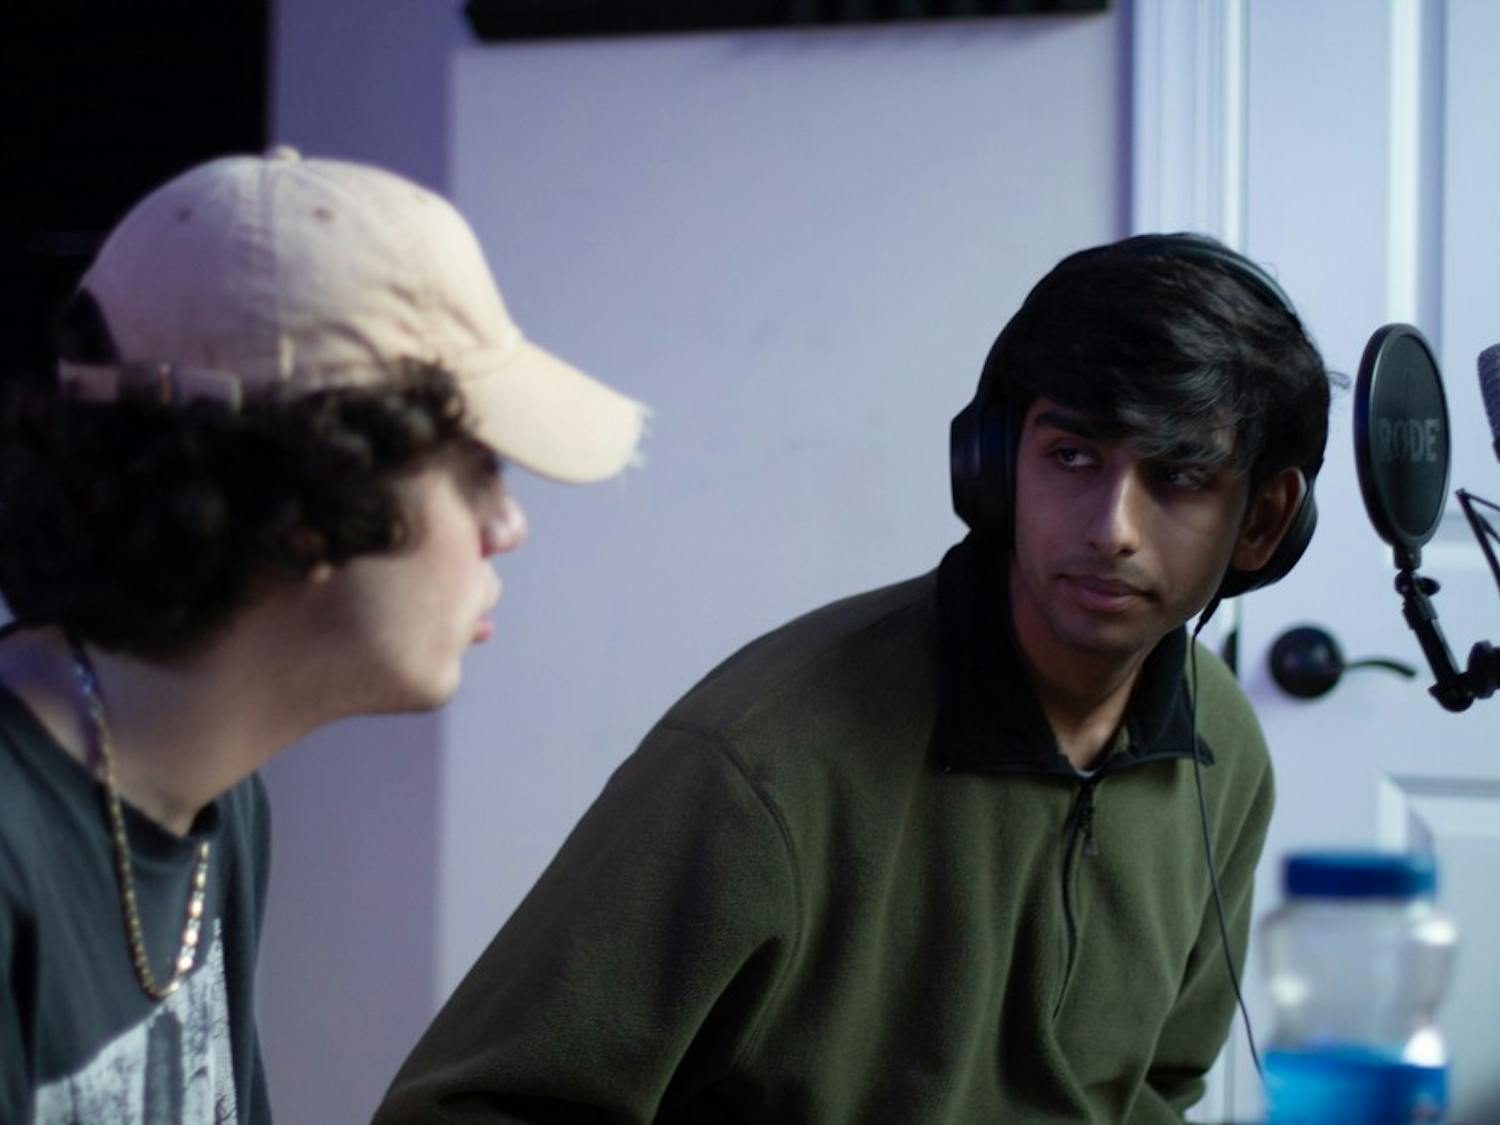 Marco Gomez and Tanmay Joshi, both 18-year-olds from Cary, discuss Weston Estate's soon-to-be-released song on Sunday, Feb. 2, 2020. The "anti-pop" band draws from idols like Frank Ocean and Clairo.